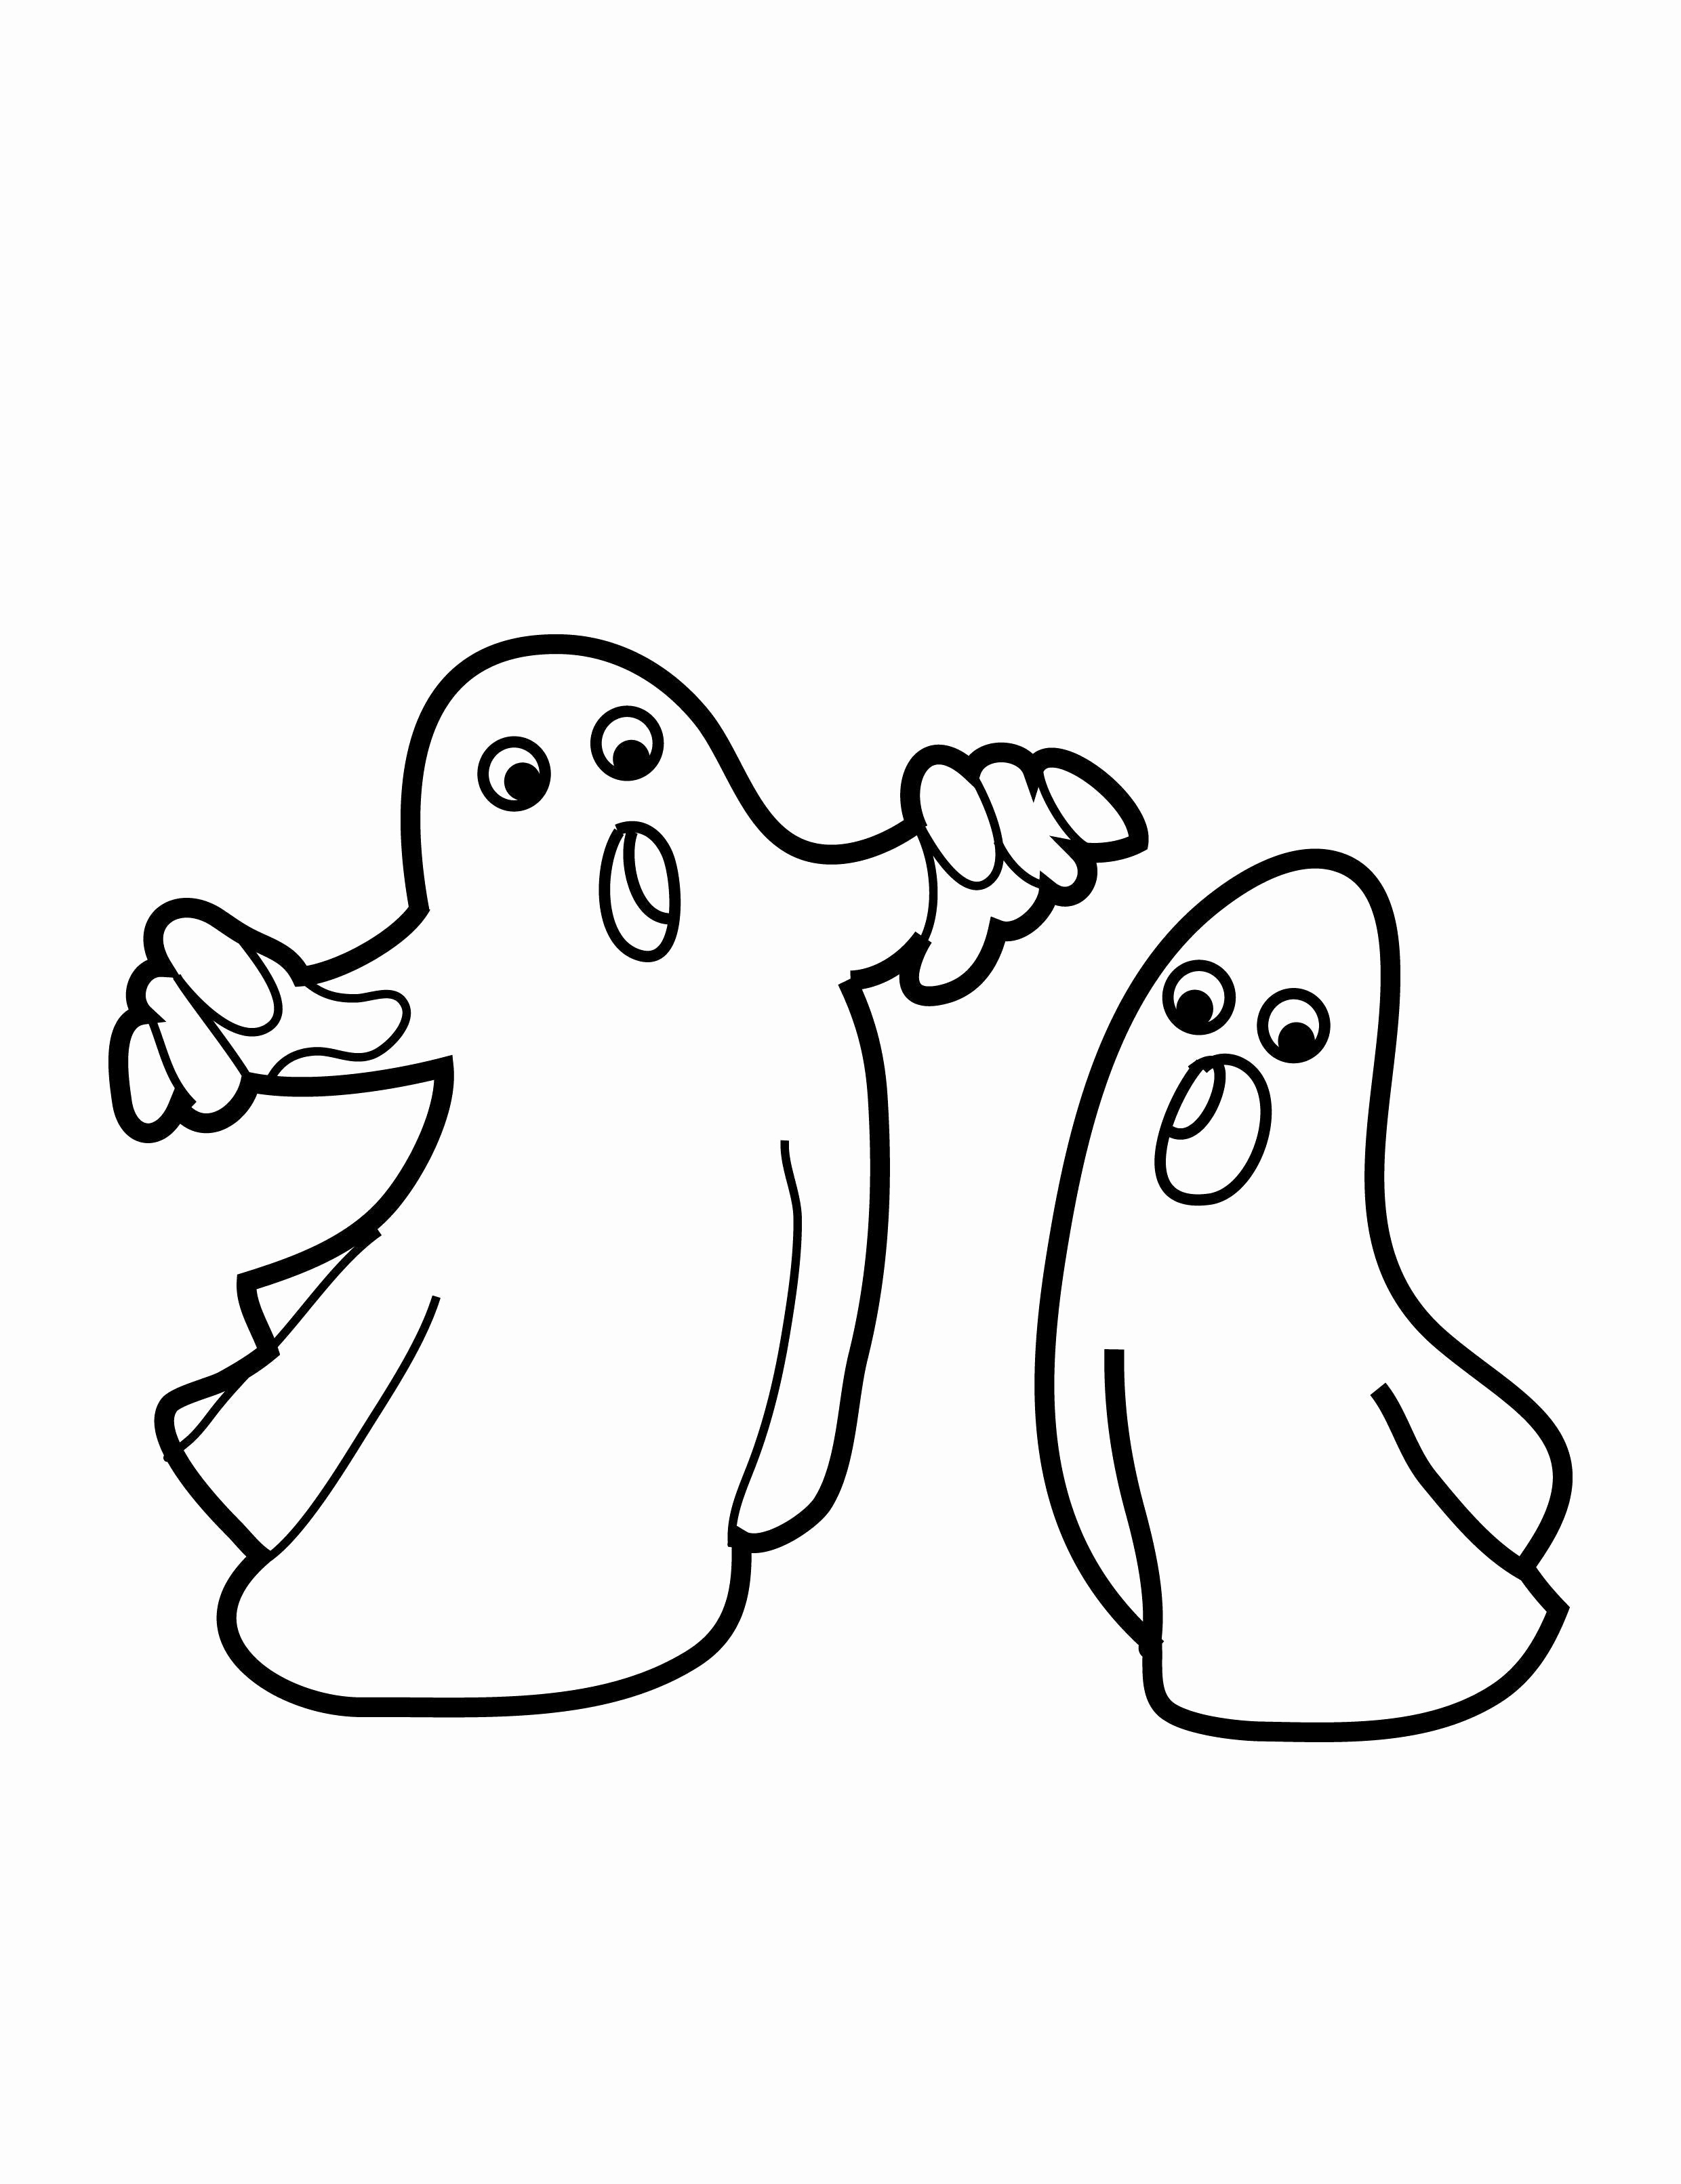 Coloring Pages Halloween Ghost - boringpop.com